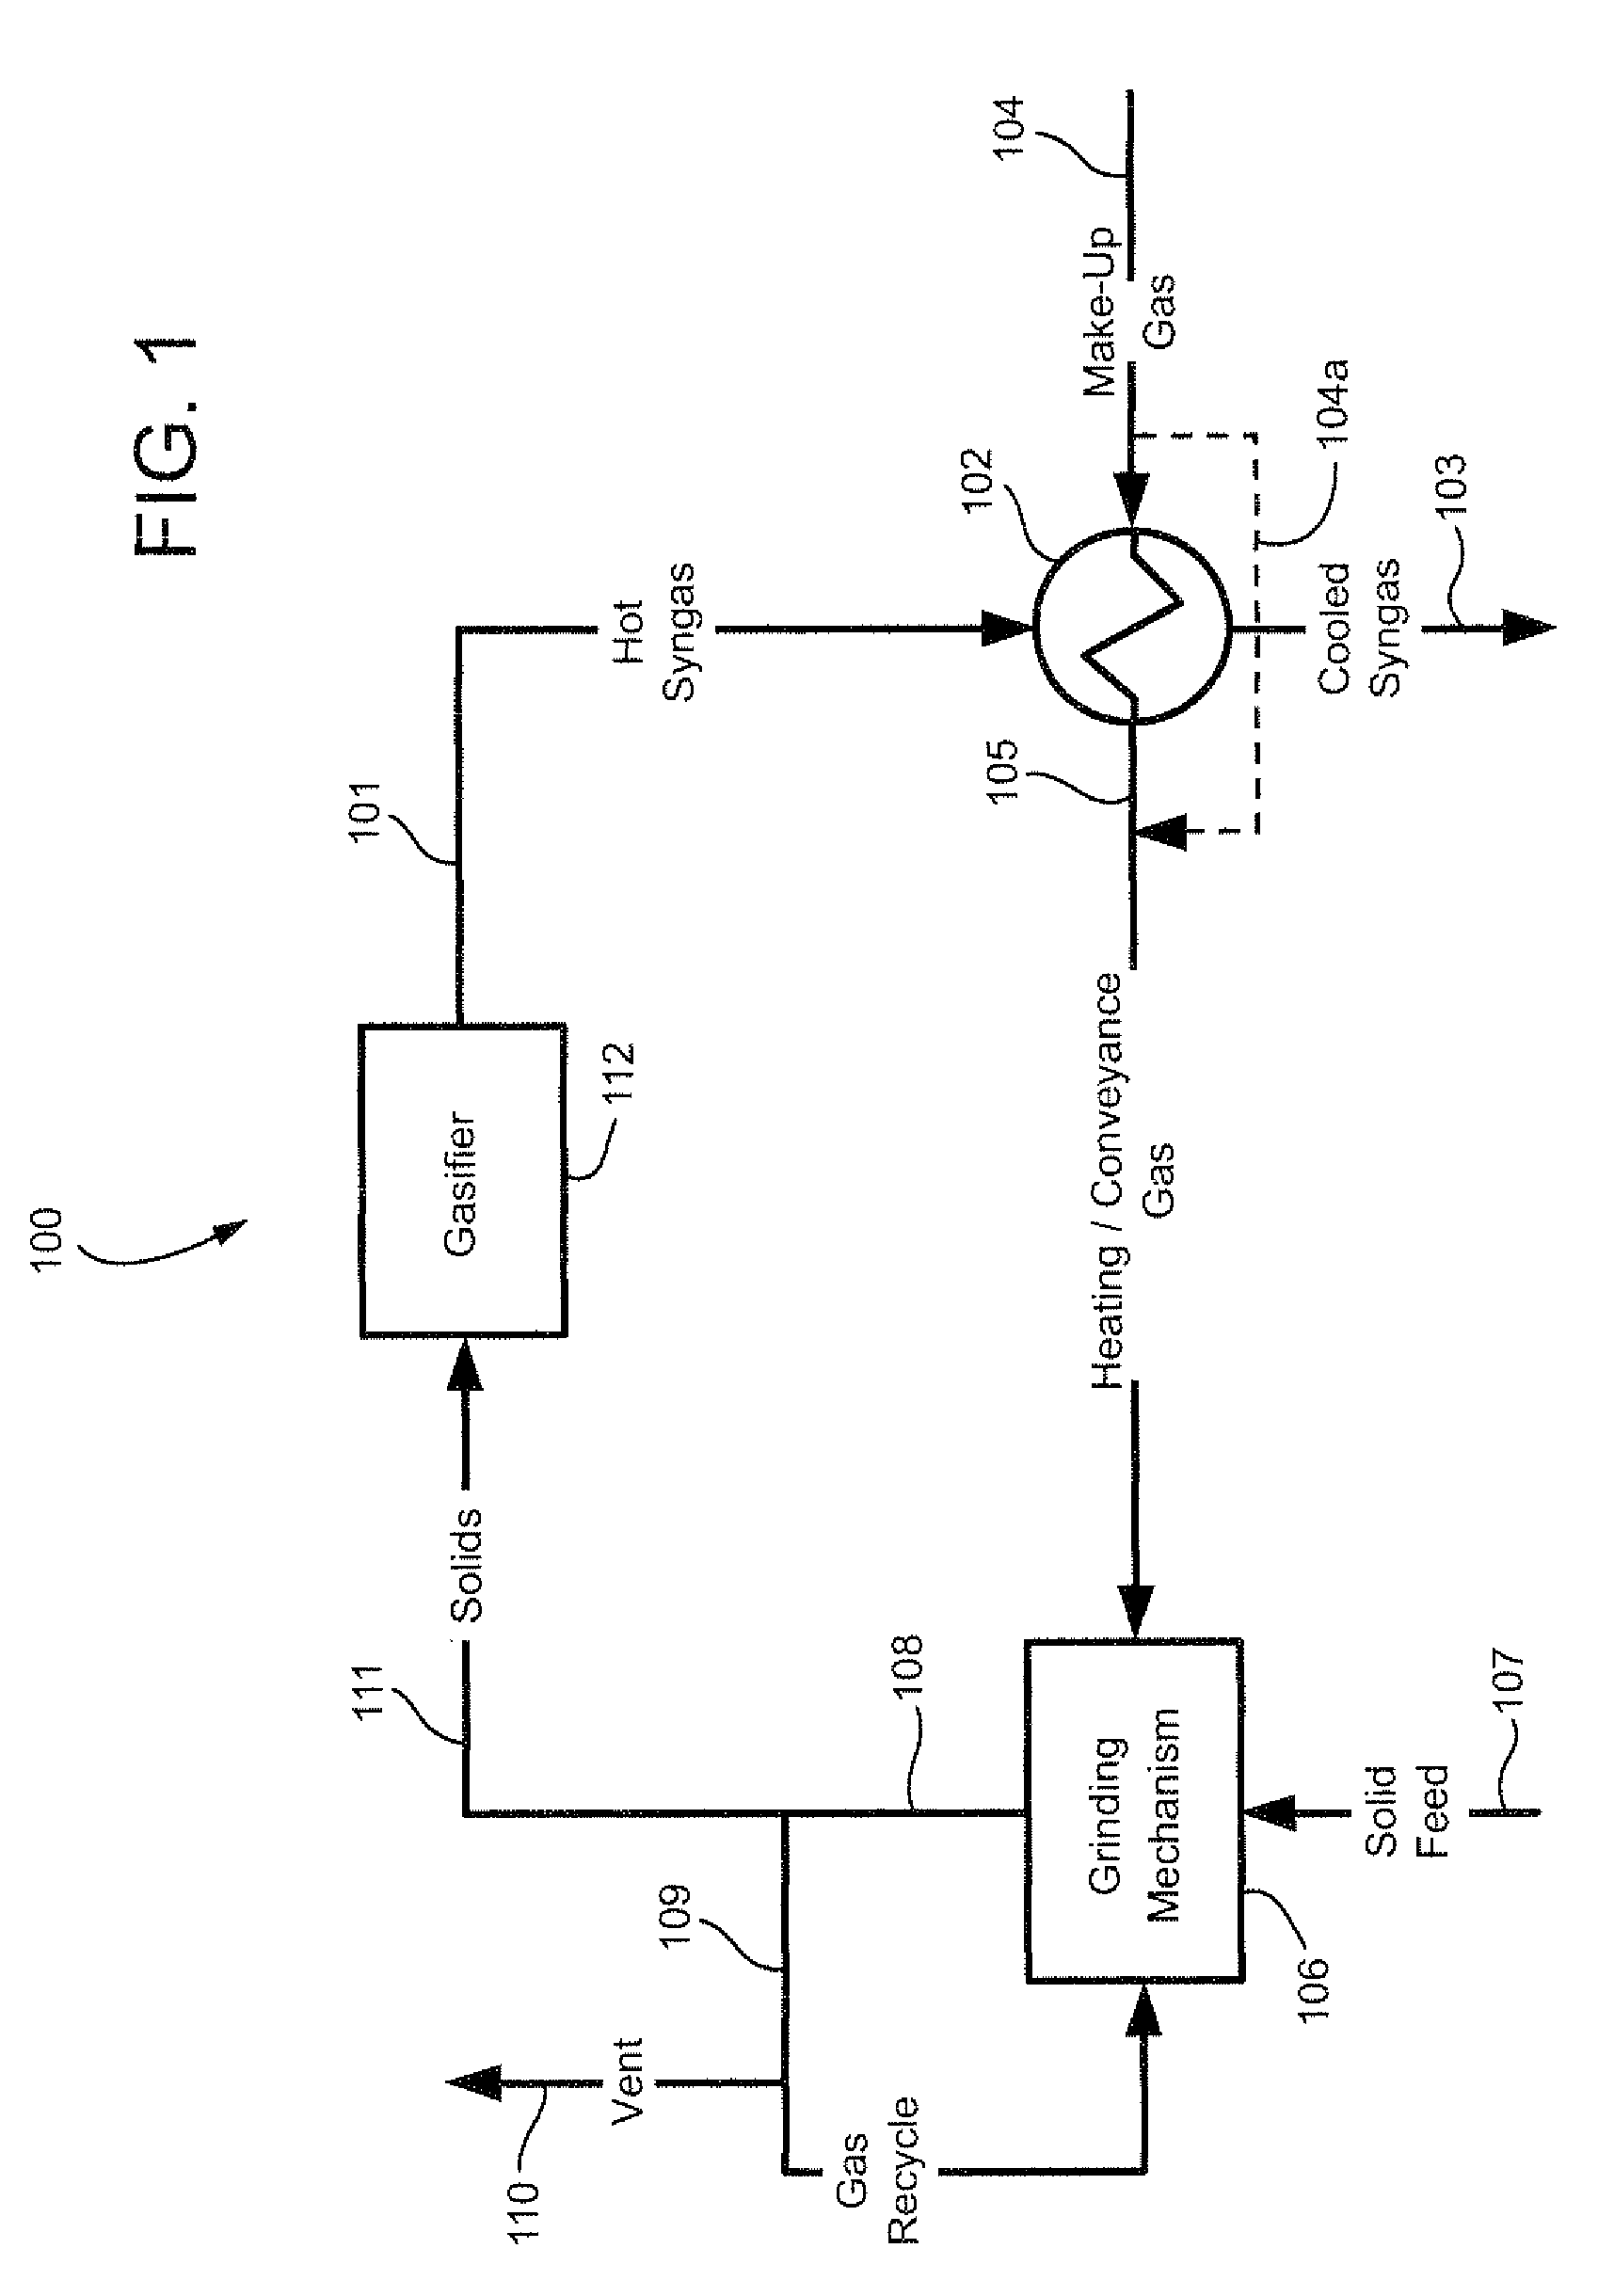 Method of using syngas cooling to heat drying gas for a dry feed system